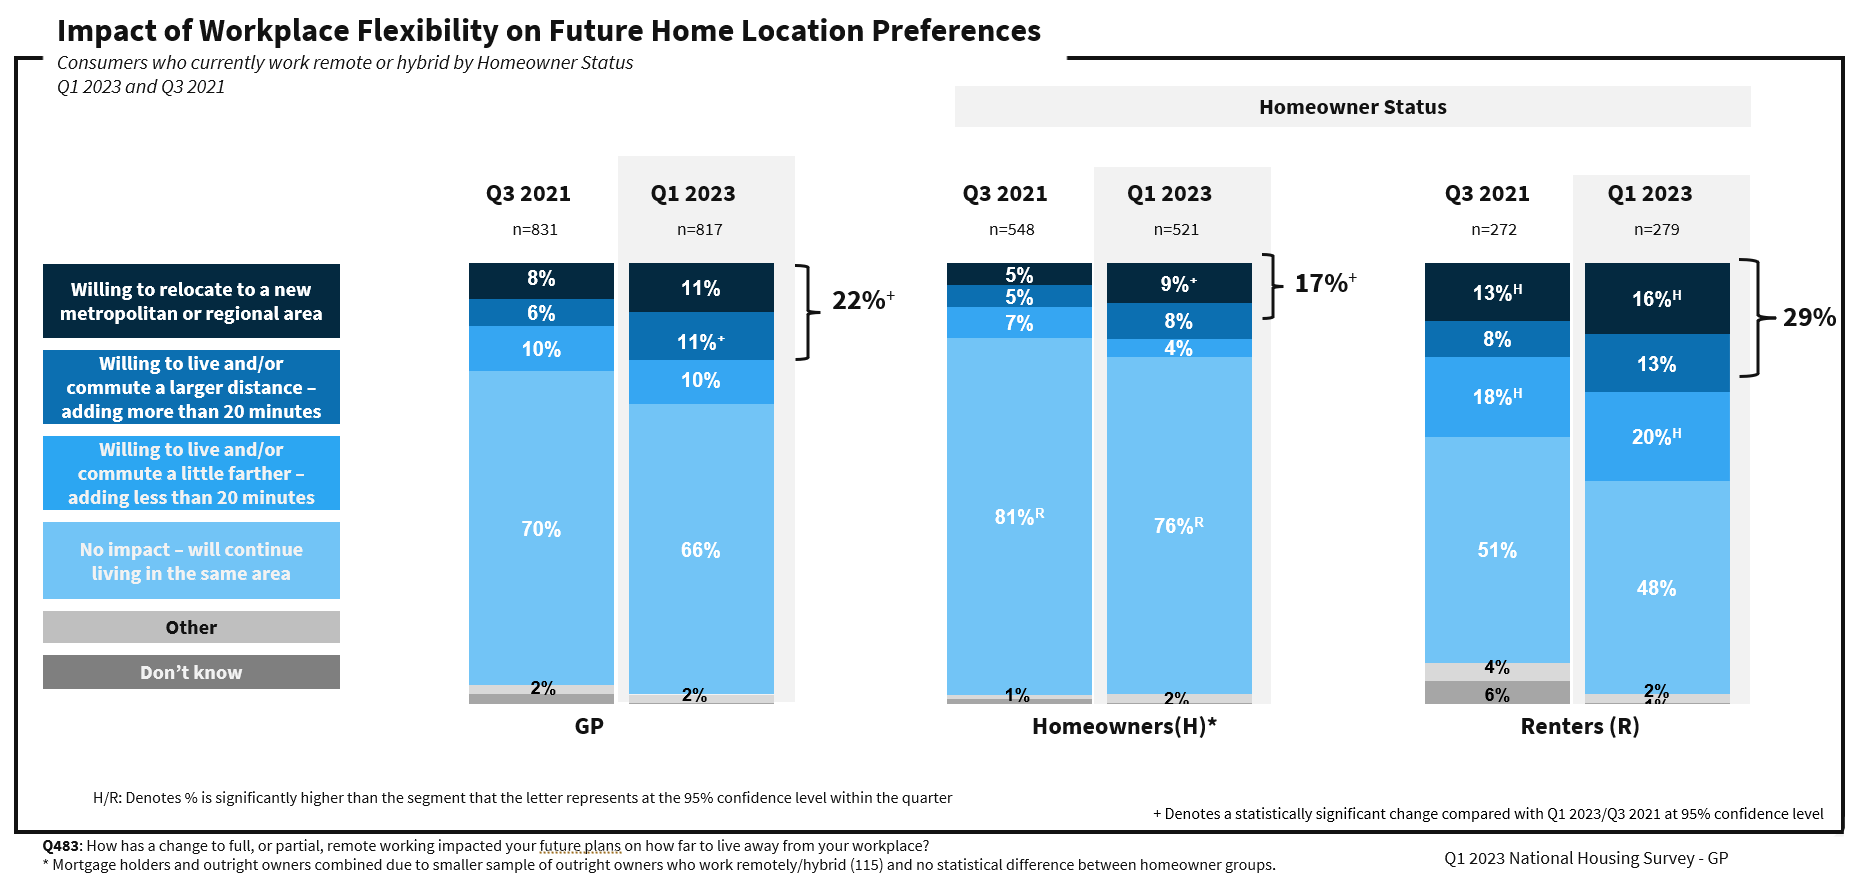 Impact of Workplace Flexibility on Future Home Location Preferences